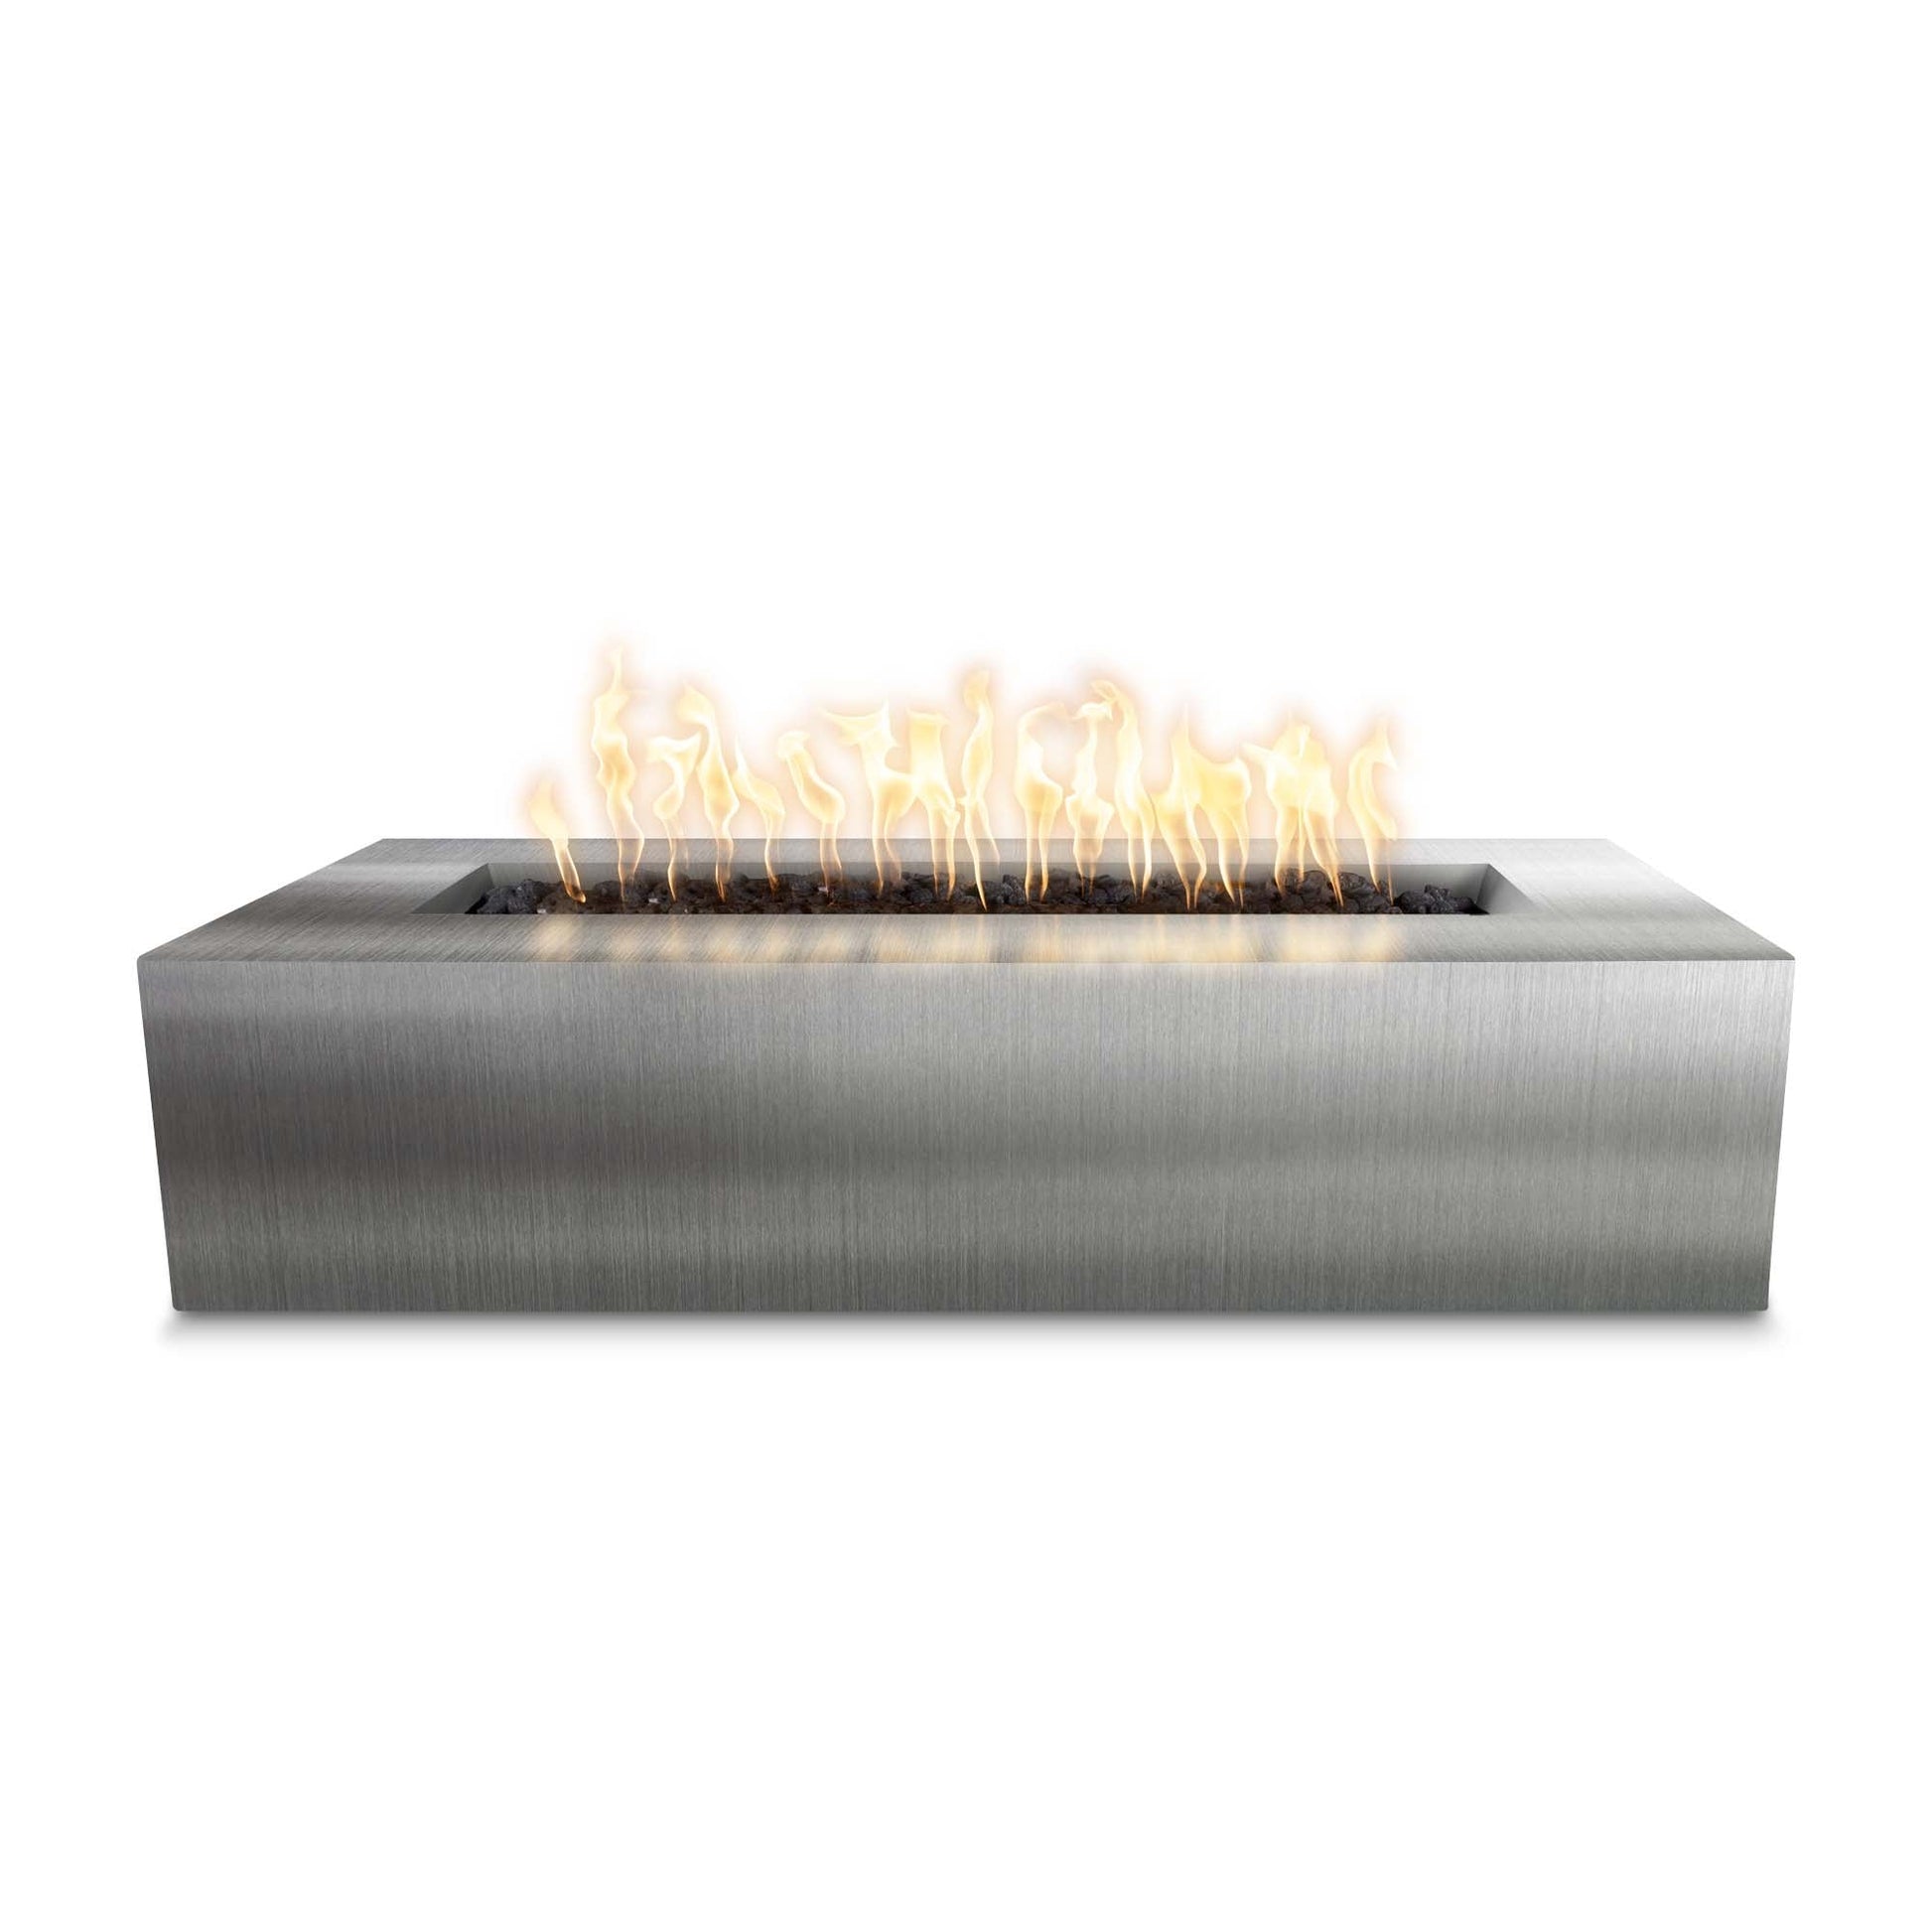 The Outdoor Plus Rectangular Regal 60" Stainless Steel Natural Gas Fire Pit with 110V Electronic Ignition